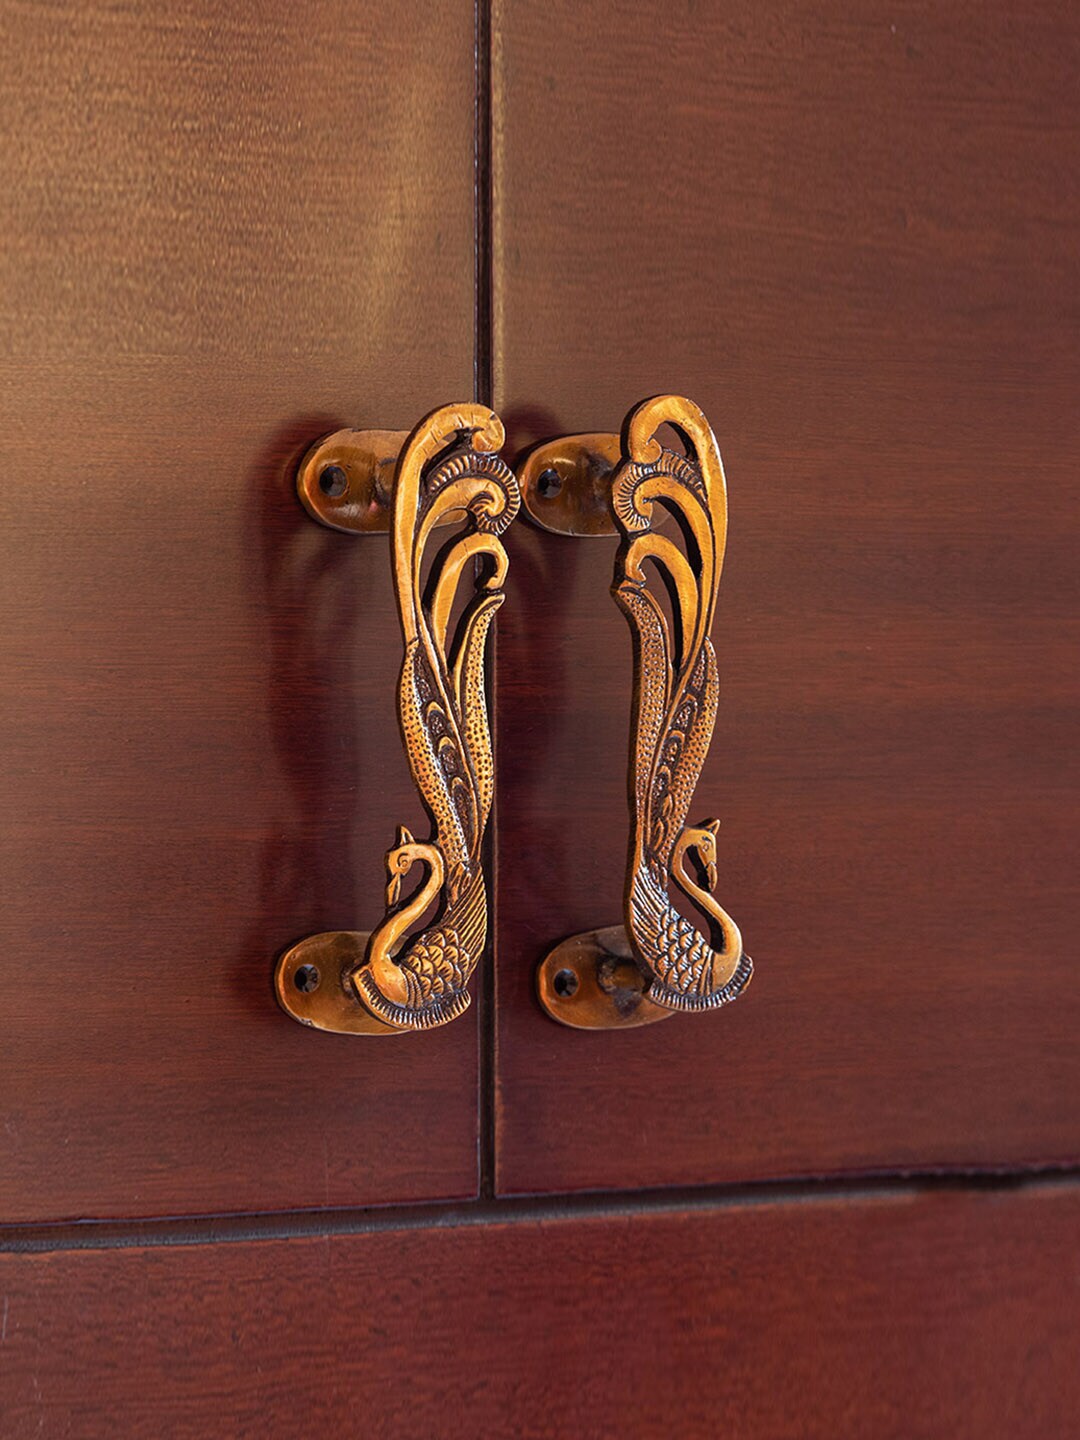 ExclusiveLane Set Of 2 Gold Colored Peacock Shaped Brass Door Handles Price in India